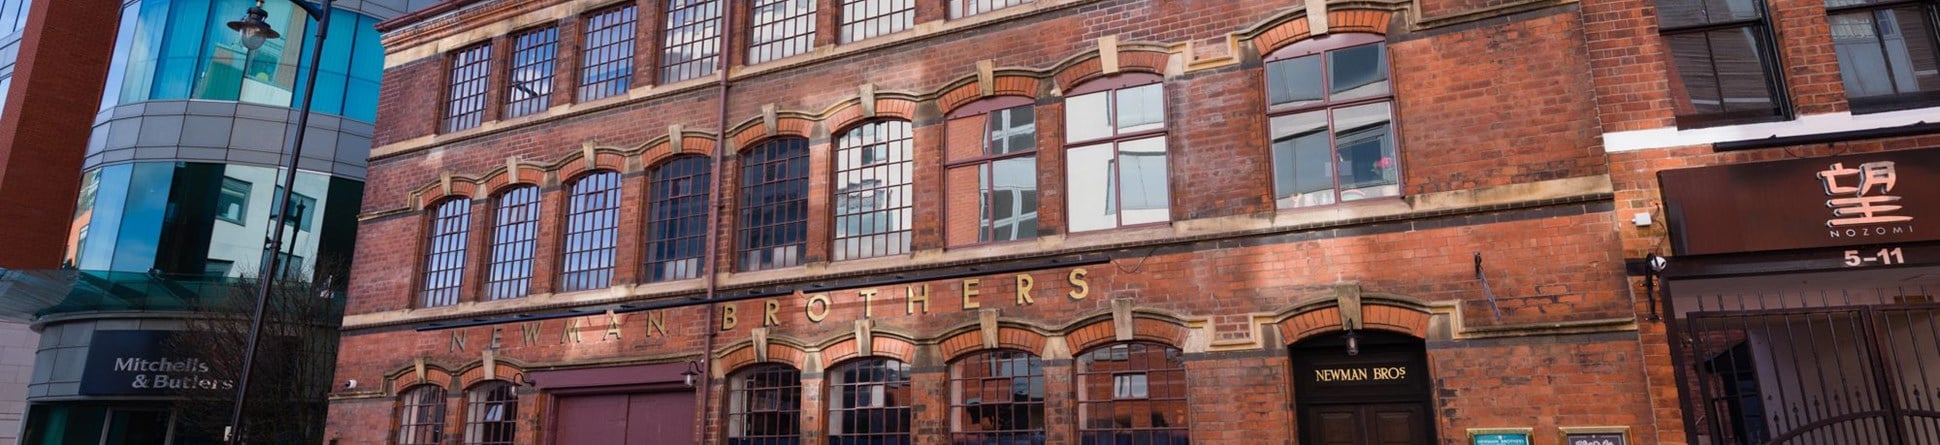 Landscape photograph of the front exterior of the Coffin Works, which is a three story red brick Victorian building with 'Newman Brothers' in gold lettering just above the ground floor